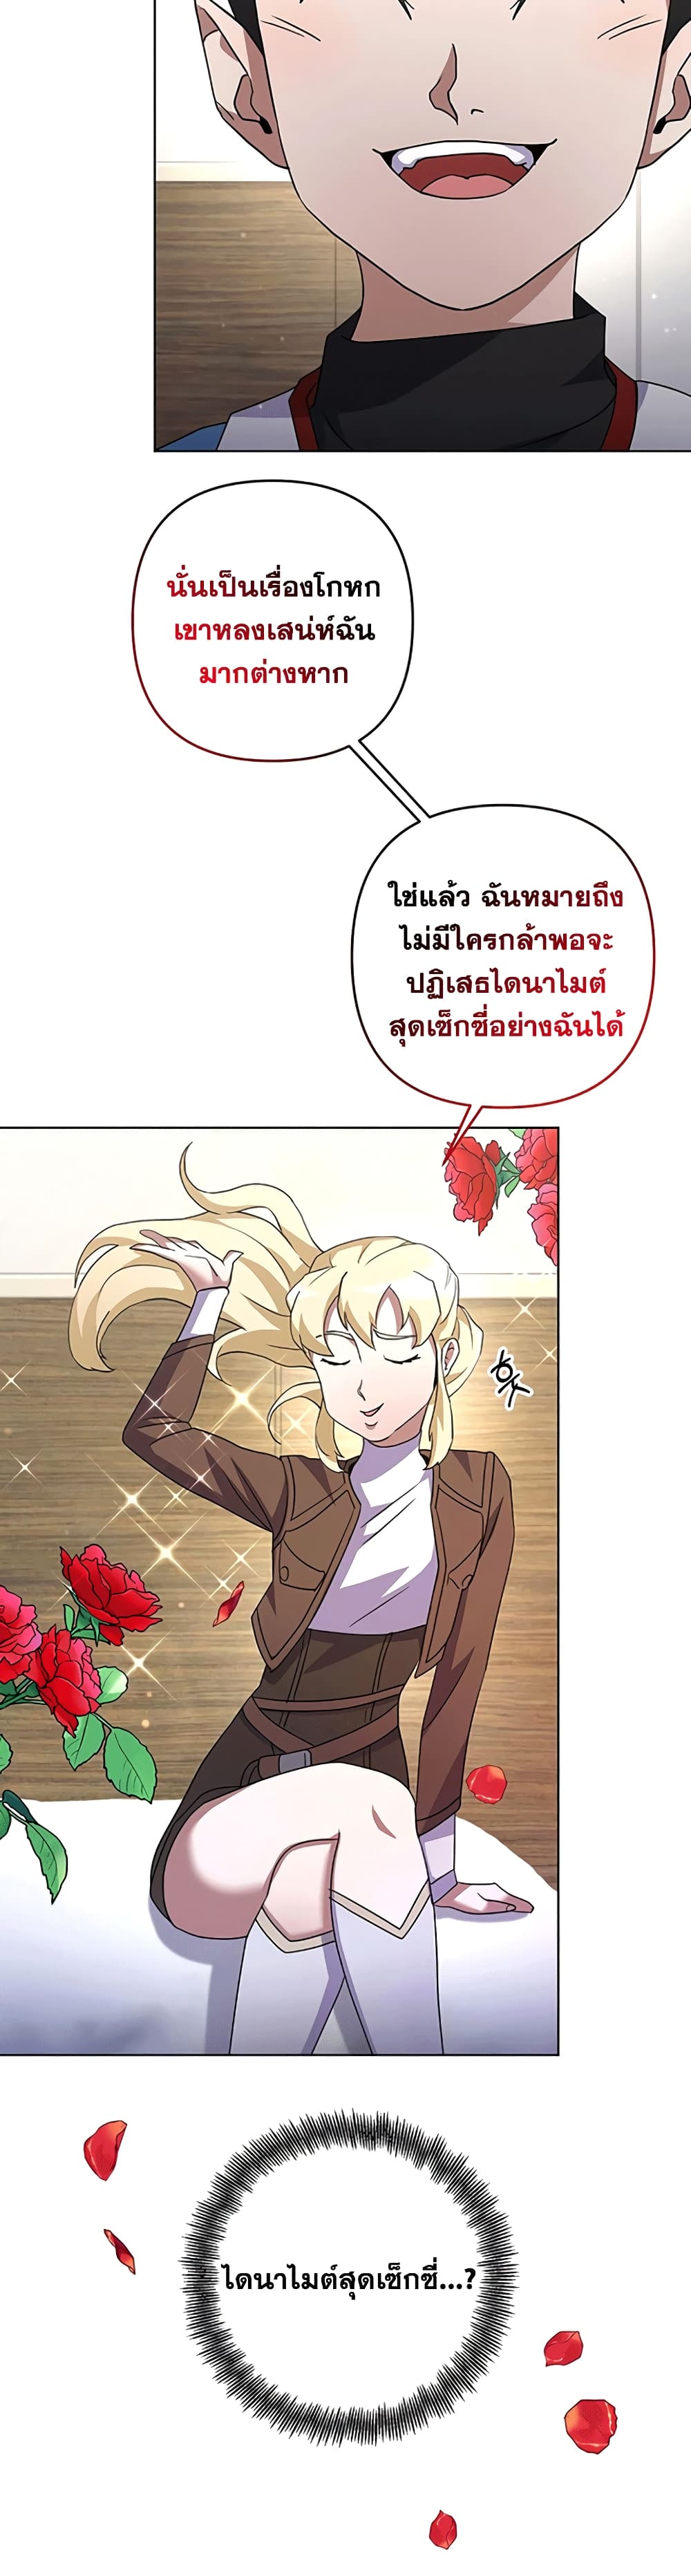 Surviving in an Action Manhwa21 (29)